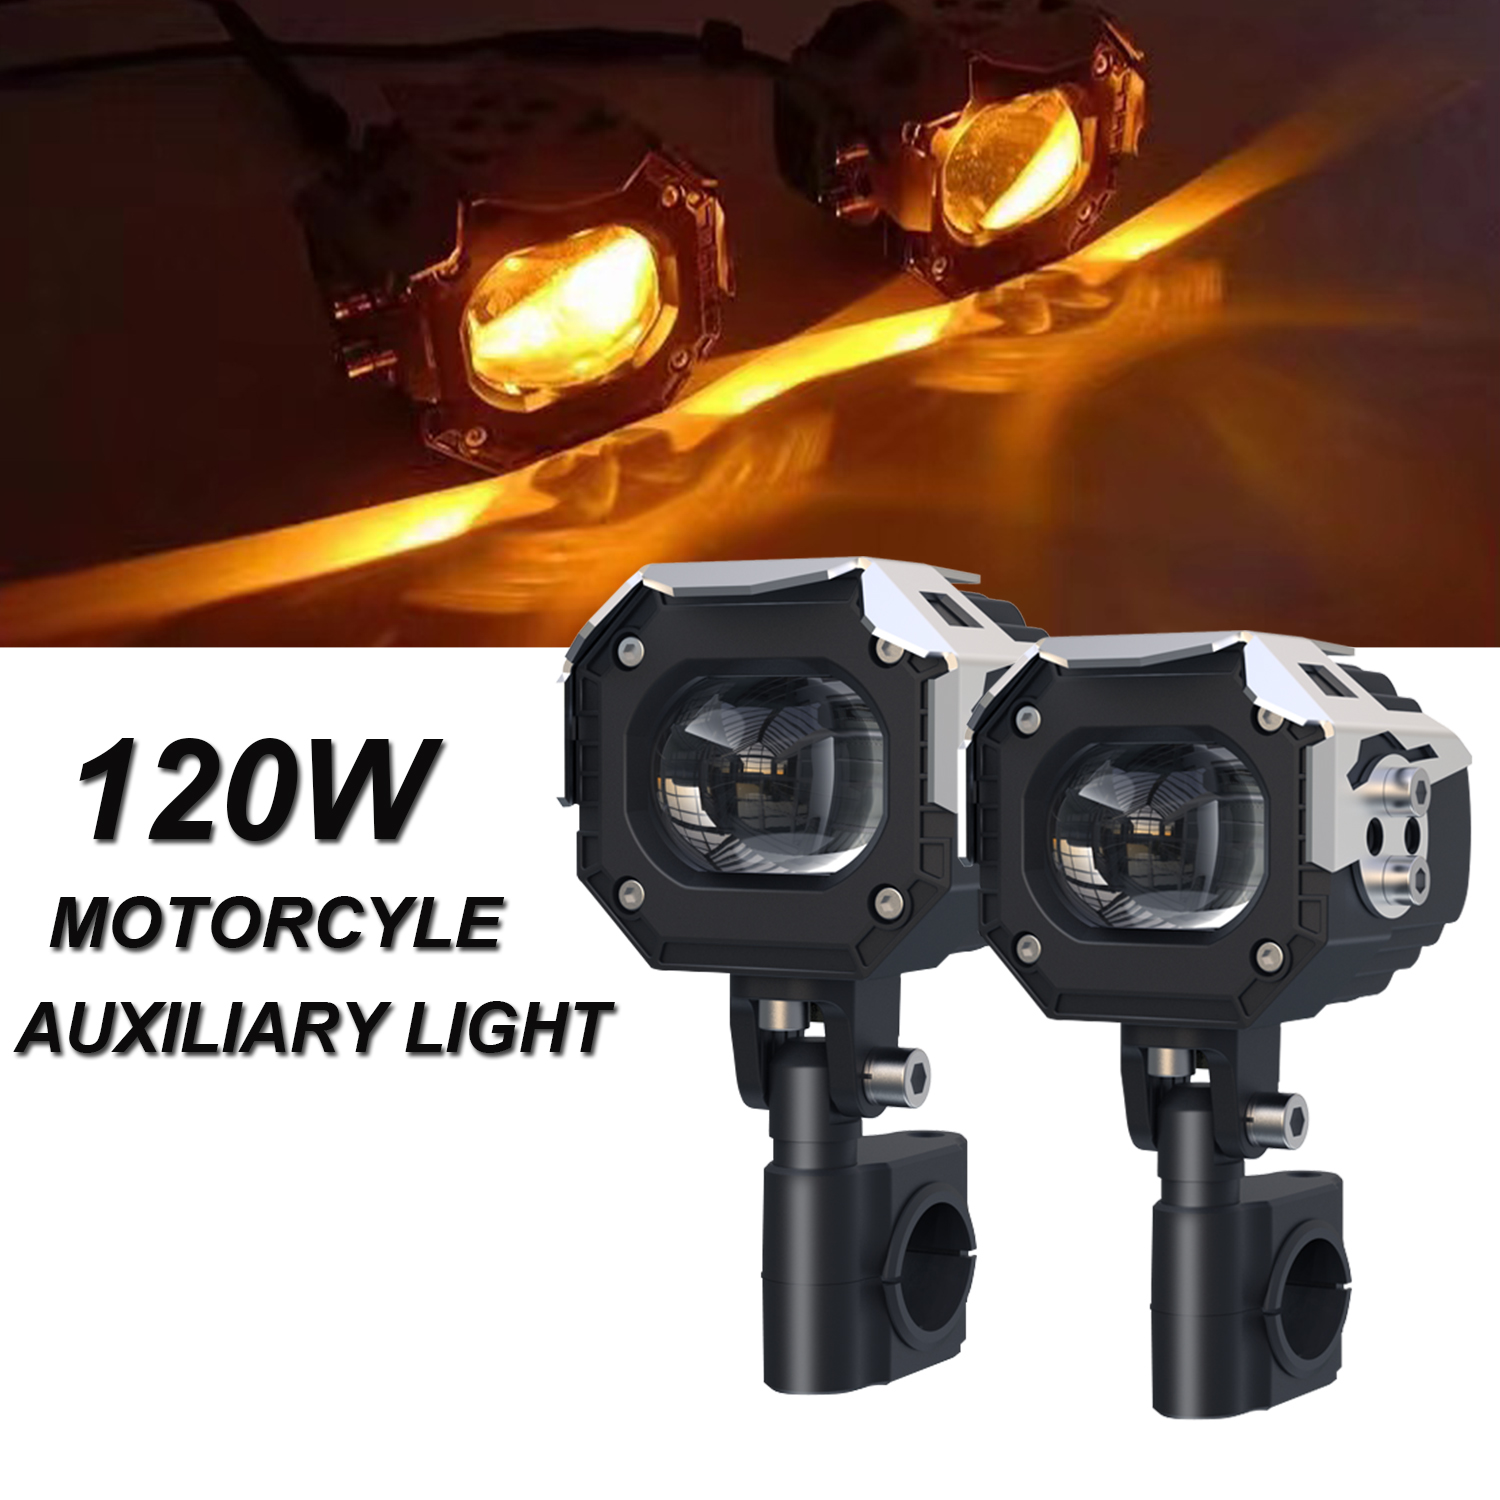 Motorcycle LED Fog Lights Auxiliary Driving Light 120W Dual Color Spotlights White Amber Strobe Flashing Lights for Car Truck 2pcs